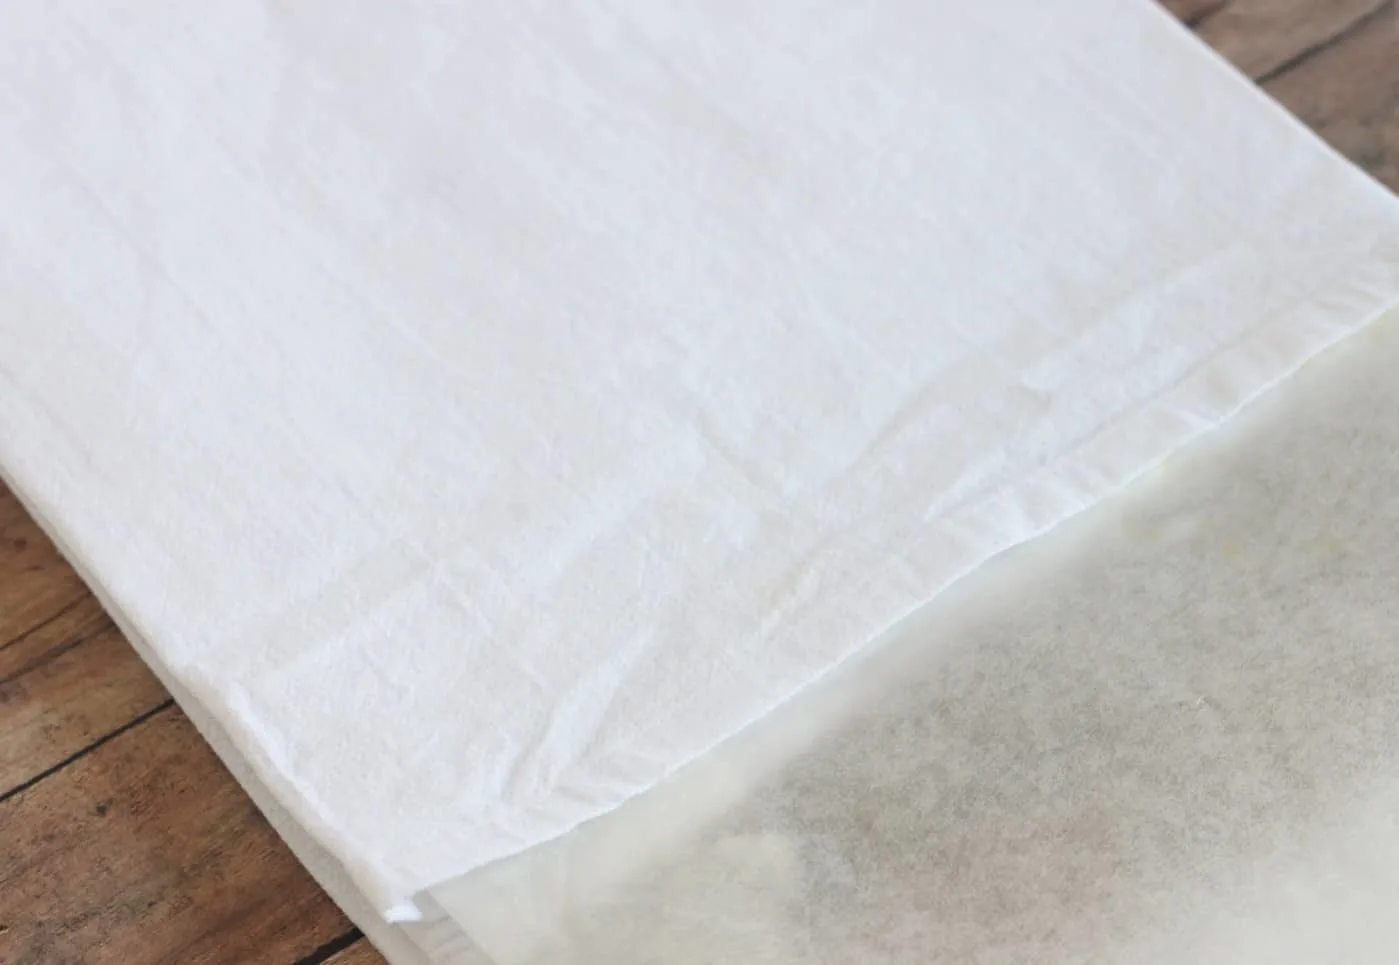 place wax paper in between layers of a tea towel